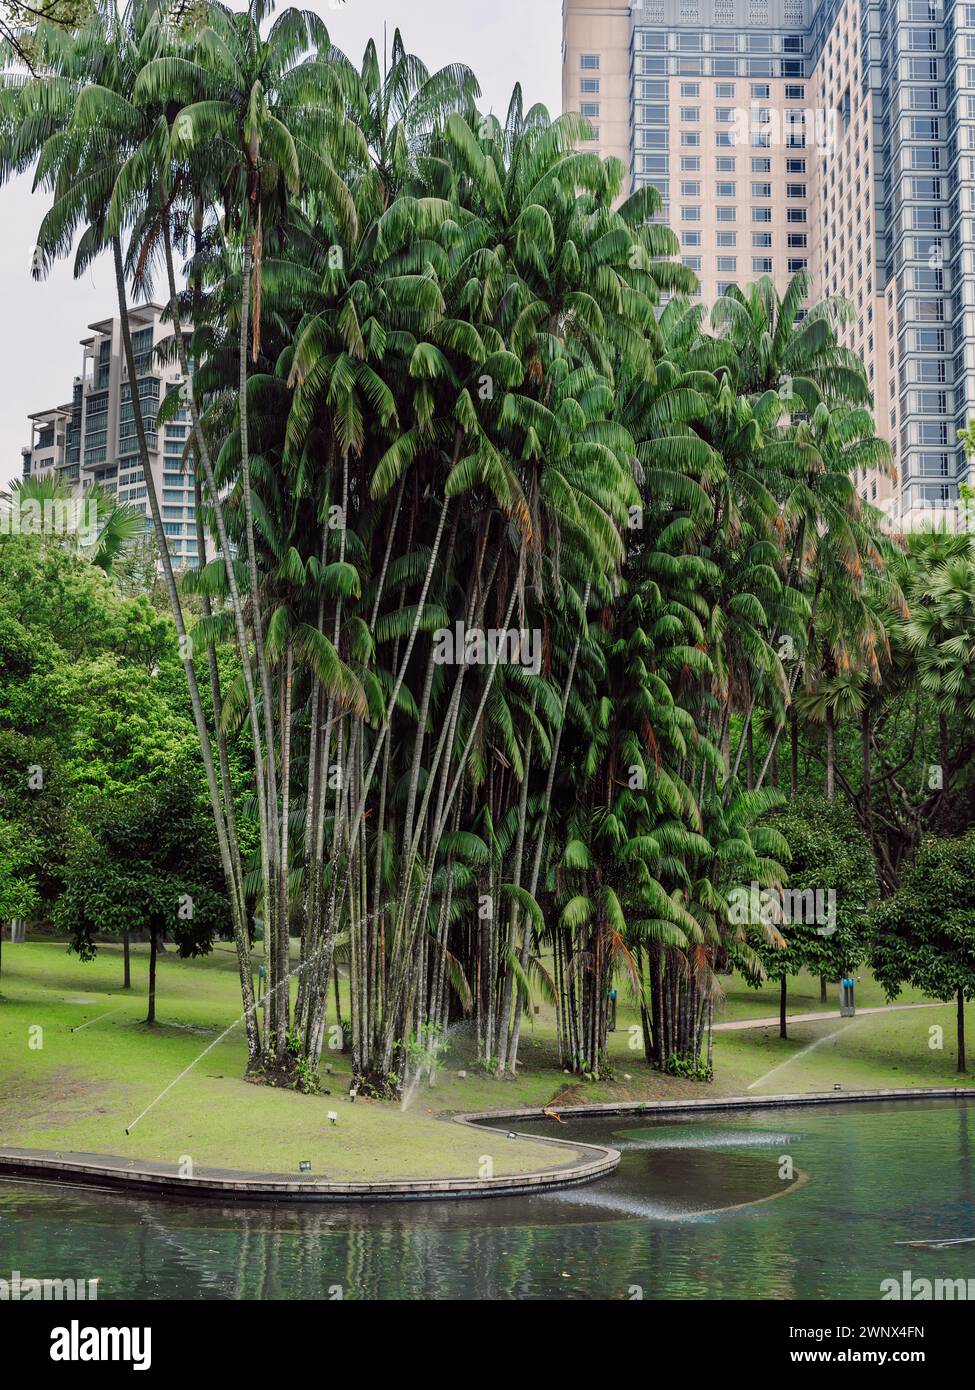 Palms trees and pond in city garden. Stock Photo